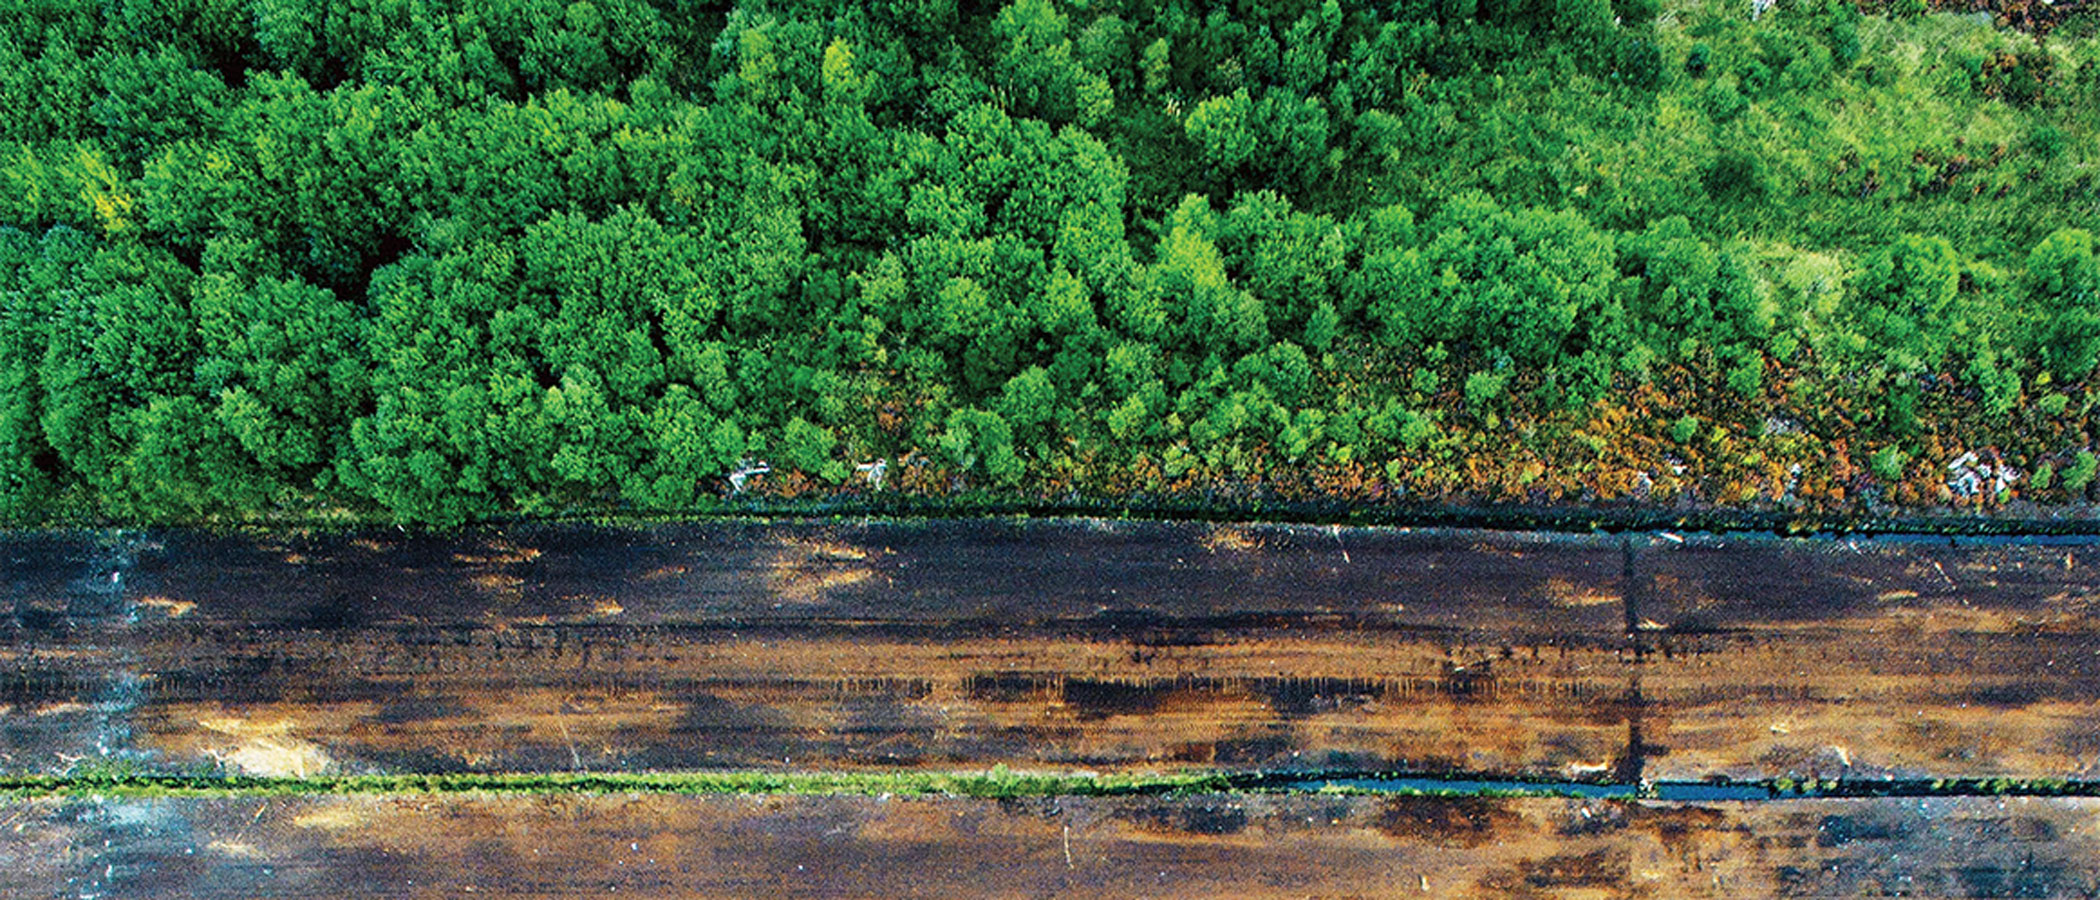 Harvested peatlands in Ireland as seen from a drone.